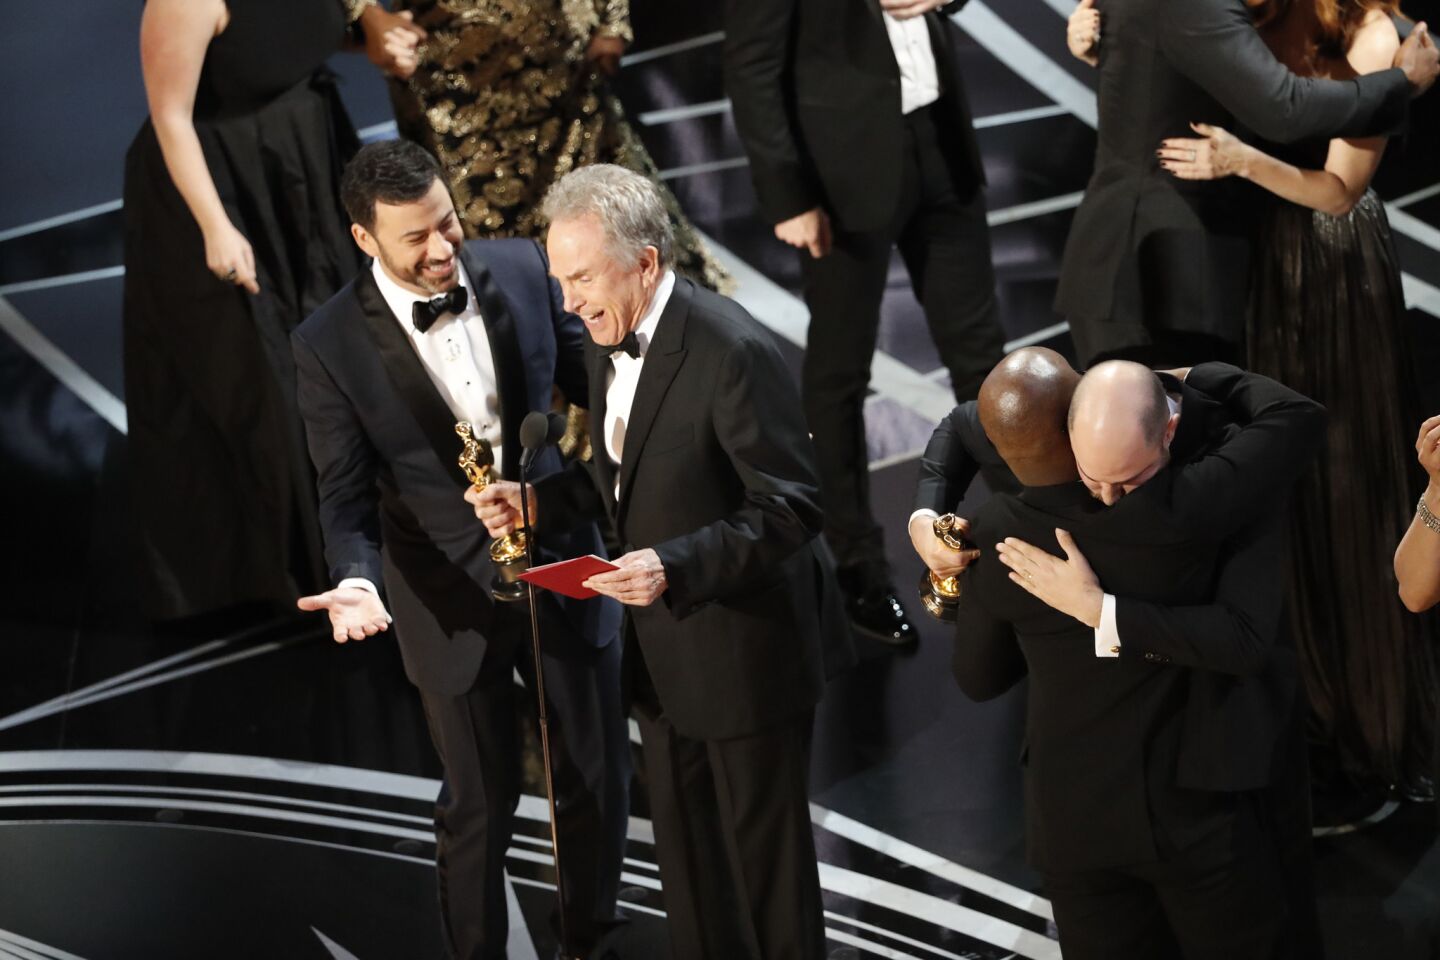 Oscars telecast host Jimmy Kimmel, left, with Warren Beatty, who explains how "La La Land" was mistakenly announced as best picture winner instead of "Moonlight" at the 89th Academy Awards.